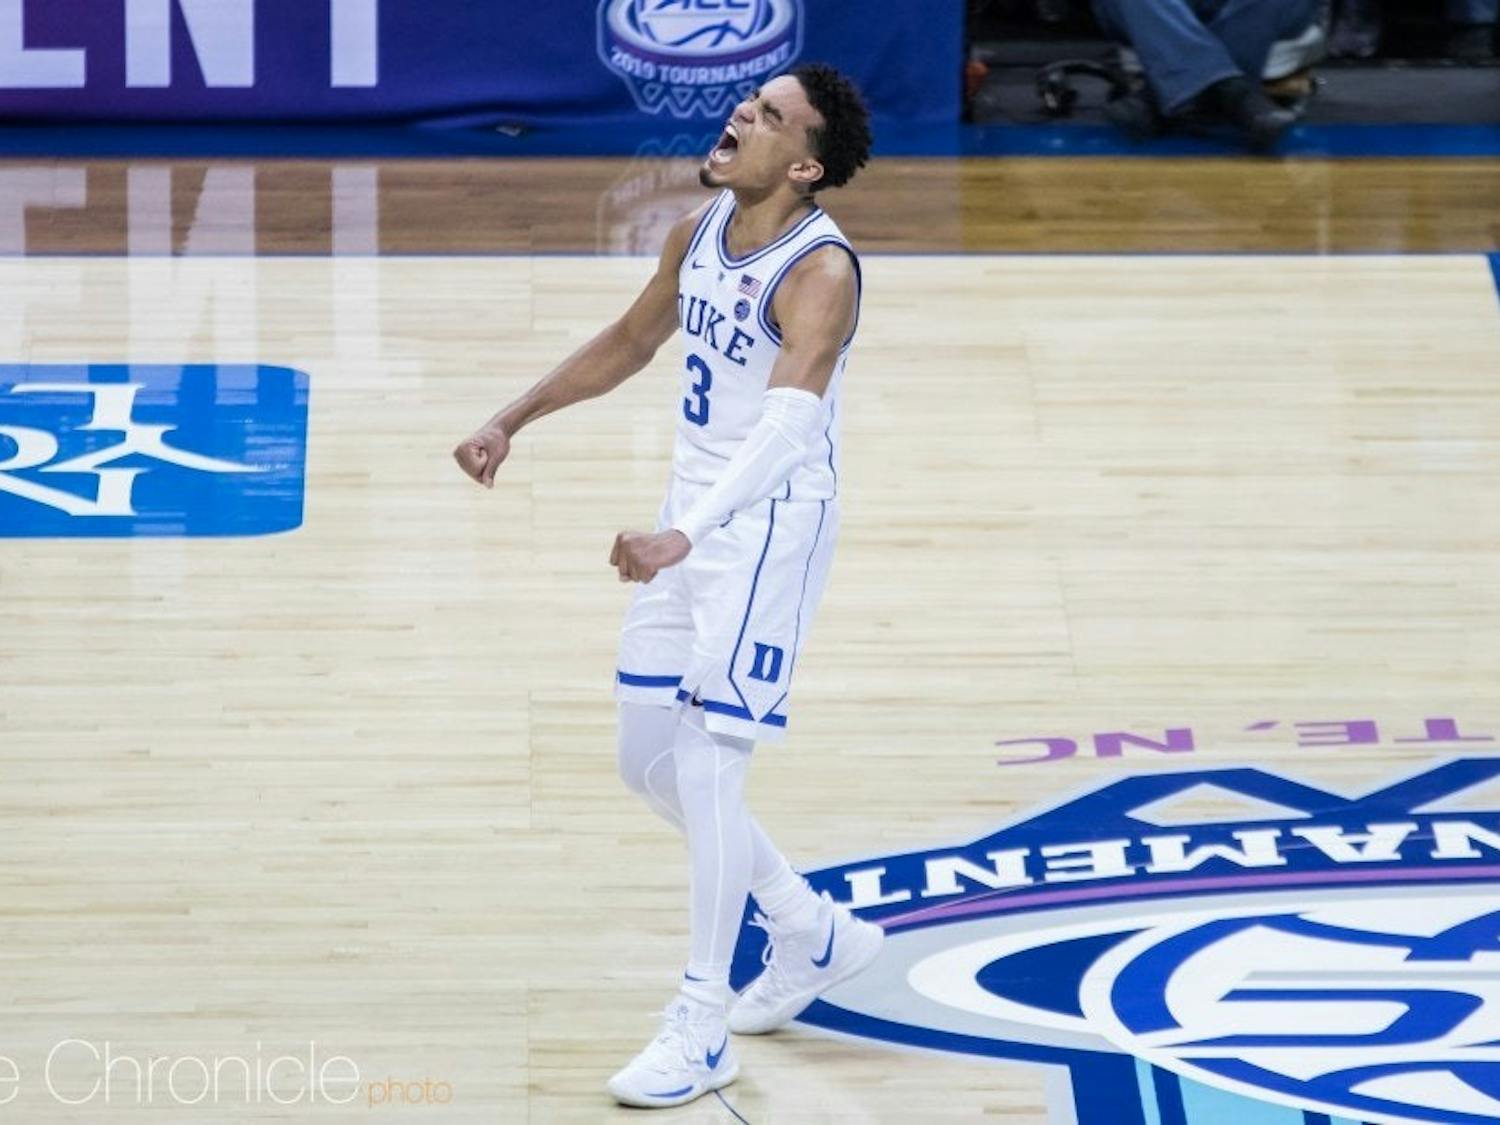 Tre Jones posted a cryptic Instagram caption that suggested he is considering staying at Duke next year.